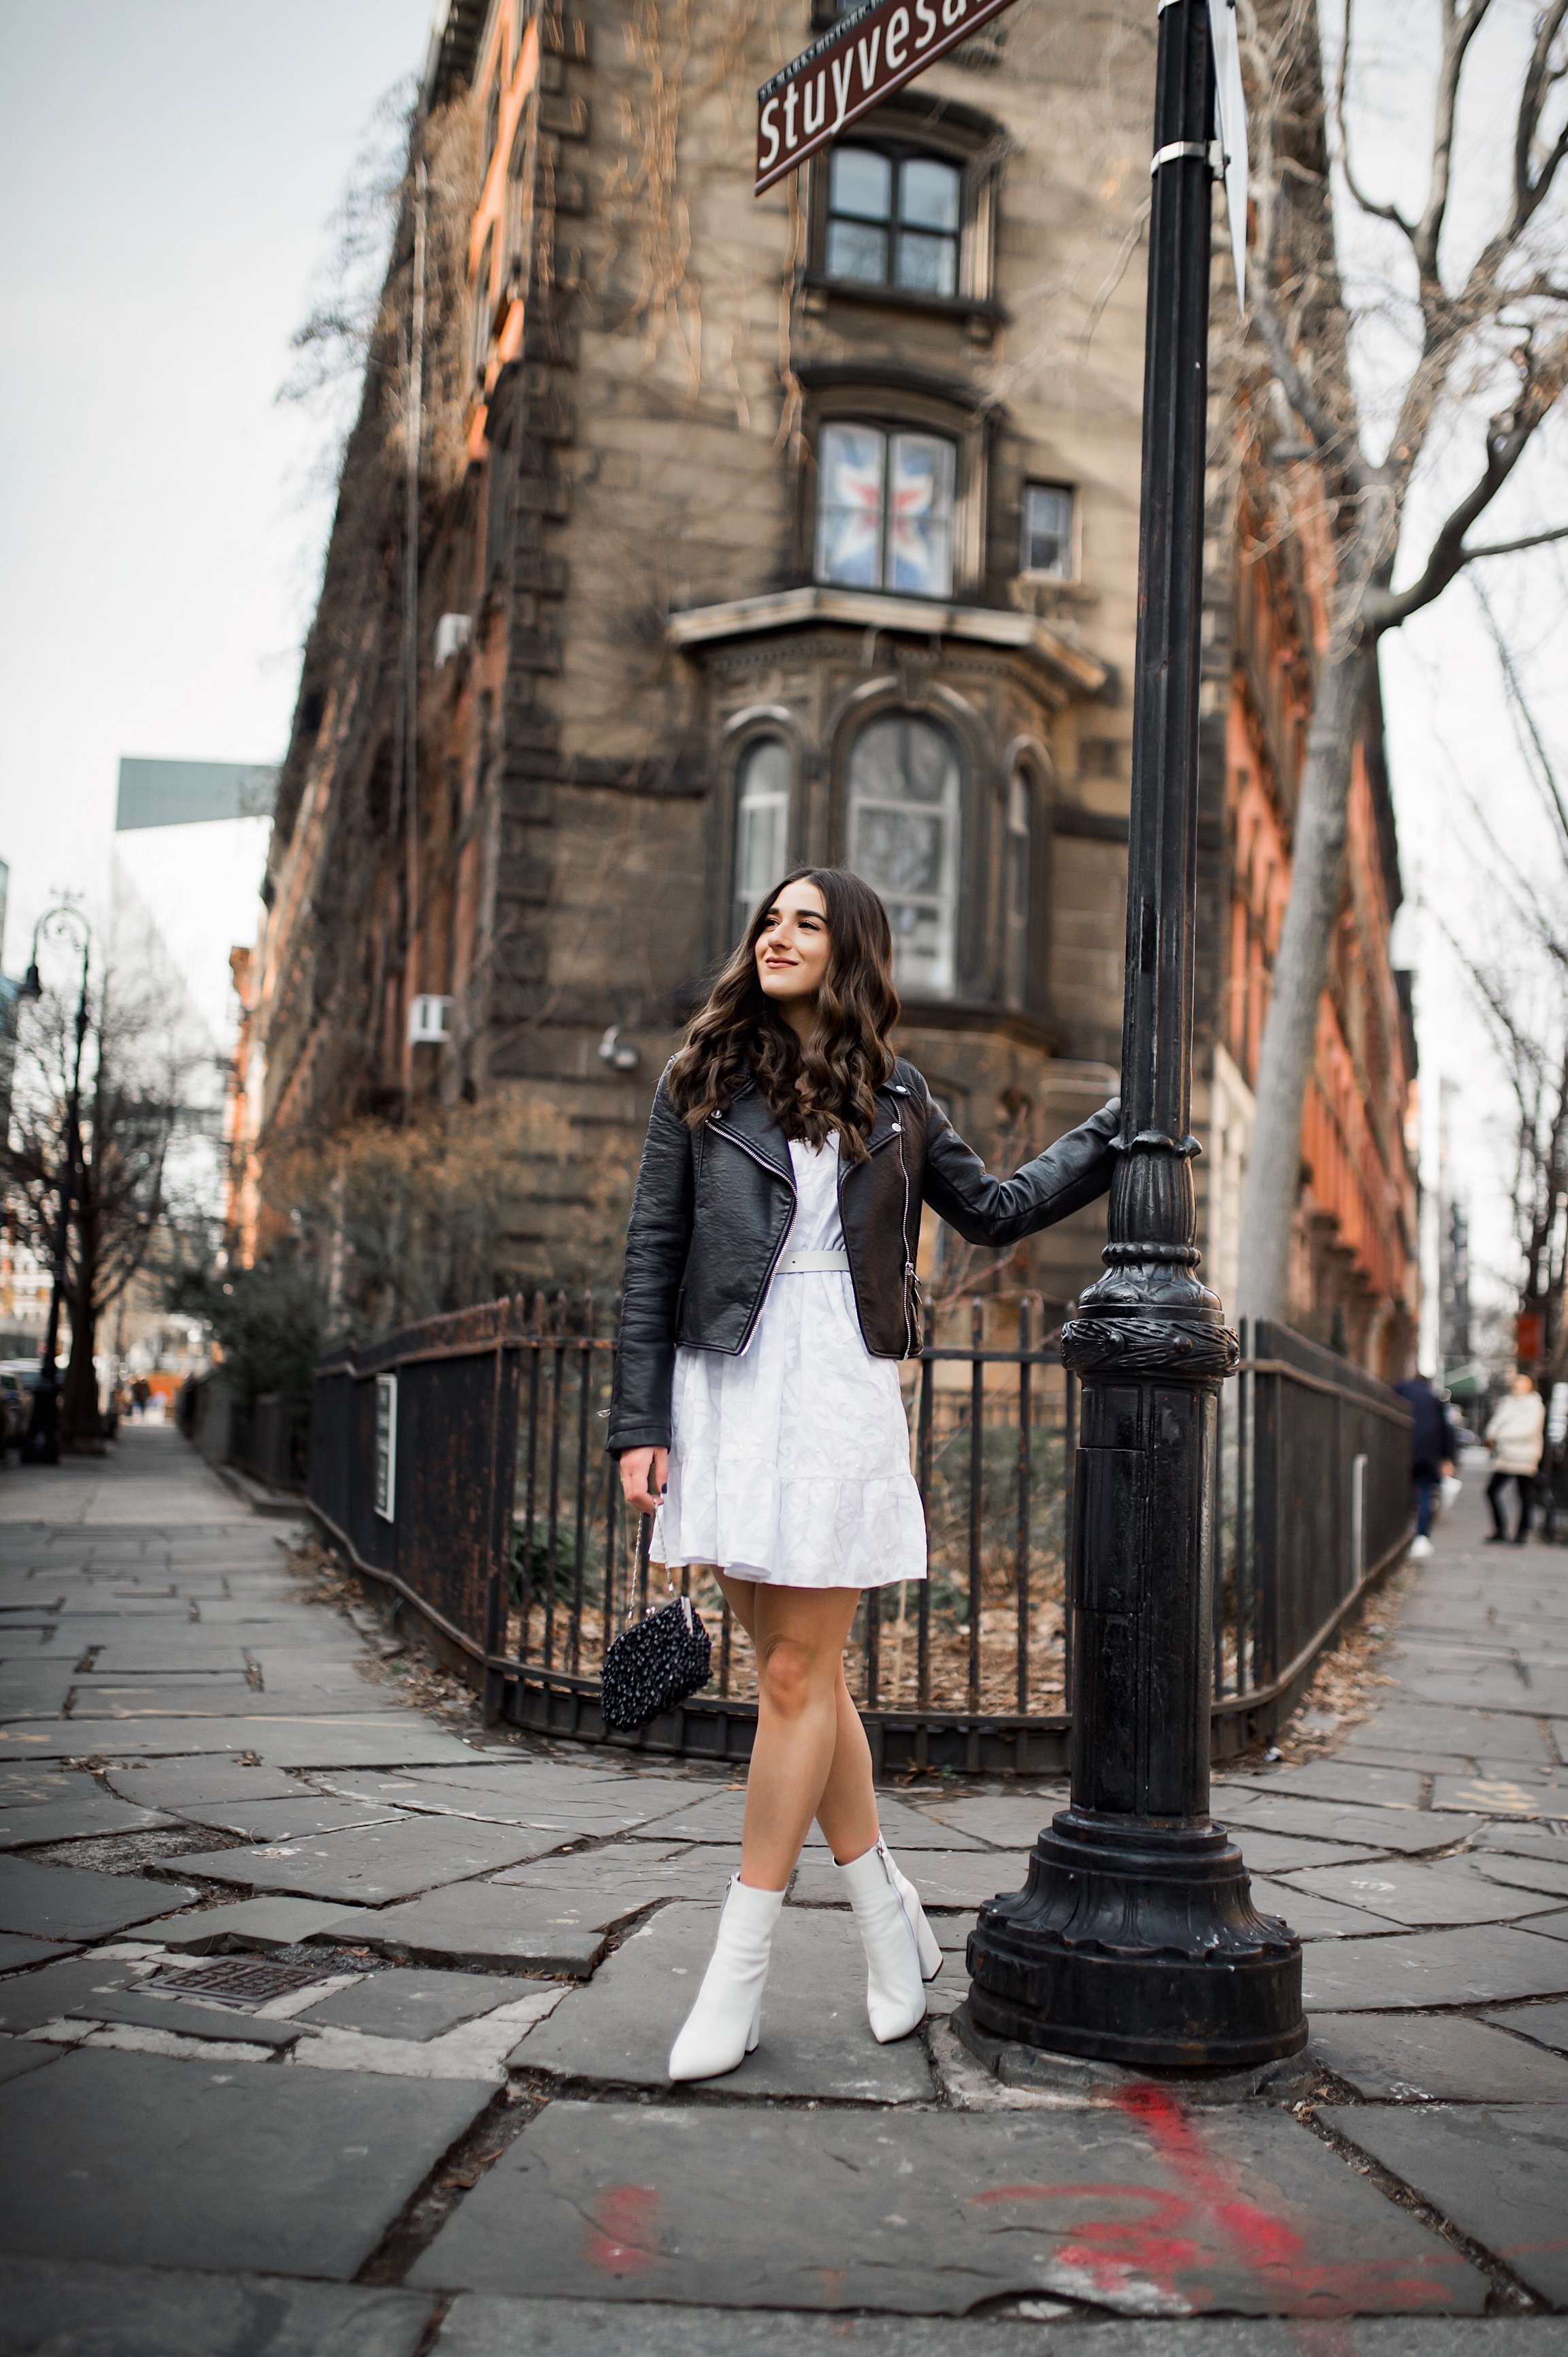 5 Things I Wish  Brands Knew White Dress Leather Jacket Esther Santer Fashion Blog NYC Street Style Blogger Outfit OOTD Trendy Shopping Girl What How To Wear Urban Outfitters ASOS Belt Booties Black Beaded Clutch Long Hair Photoshoot Stuyvesant Shop.JPG